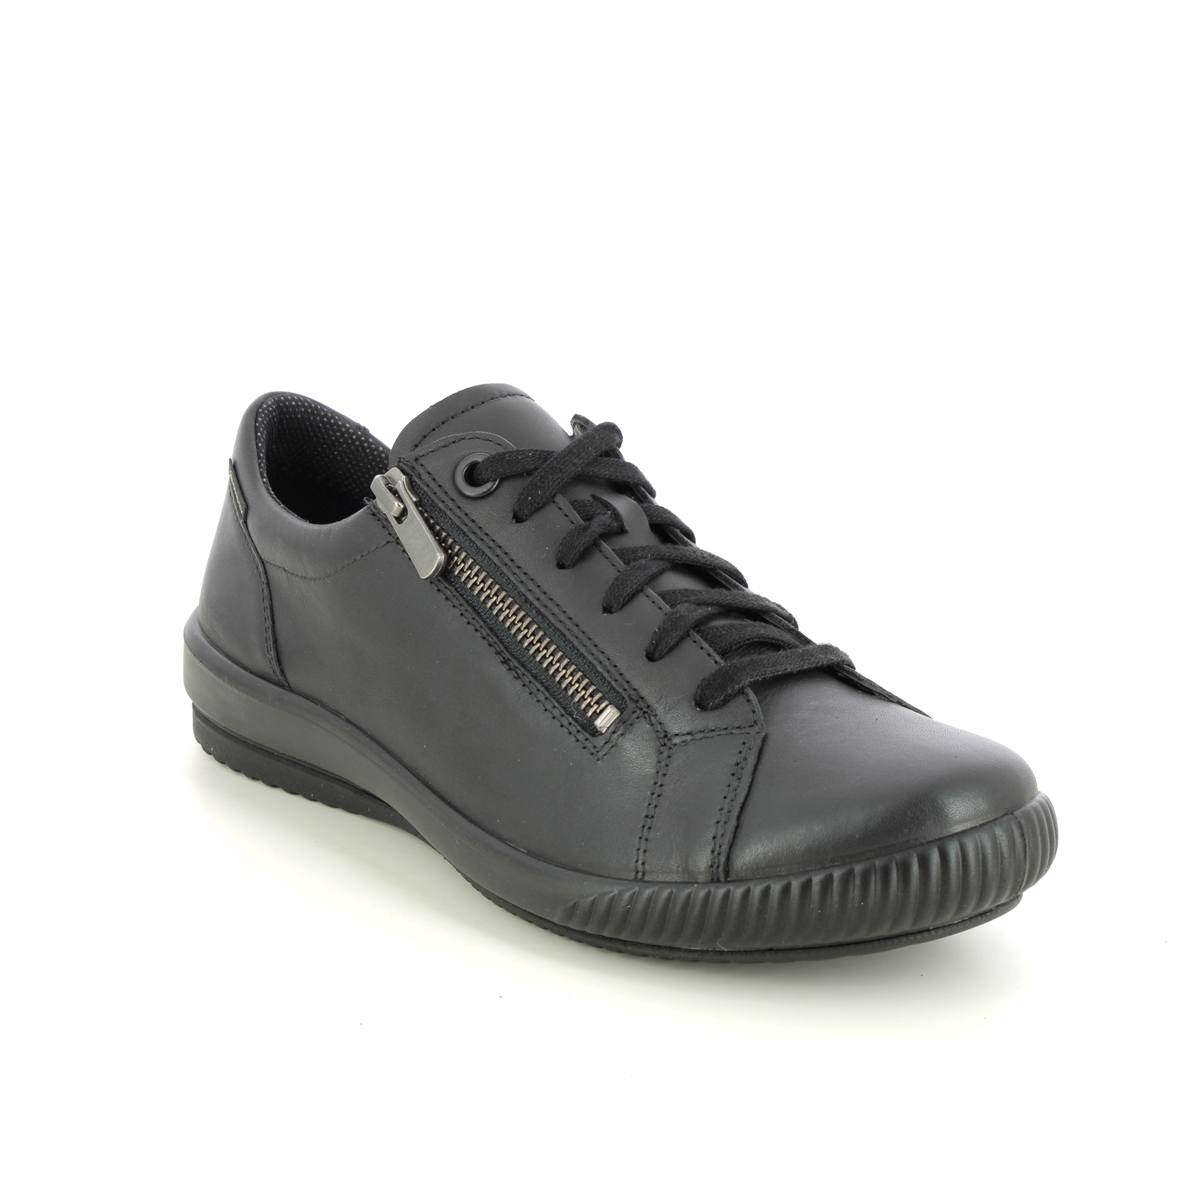 Legero Tanaro Gtx Zip Black Leather Womens Lacing Shoes 2000219-0200 In Size 3.5 In Plain Black Leather